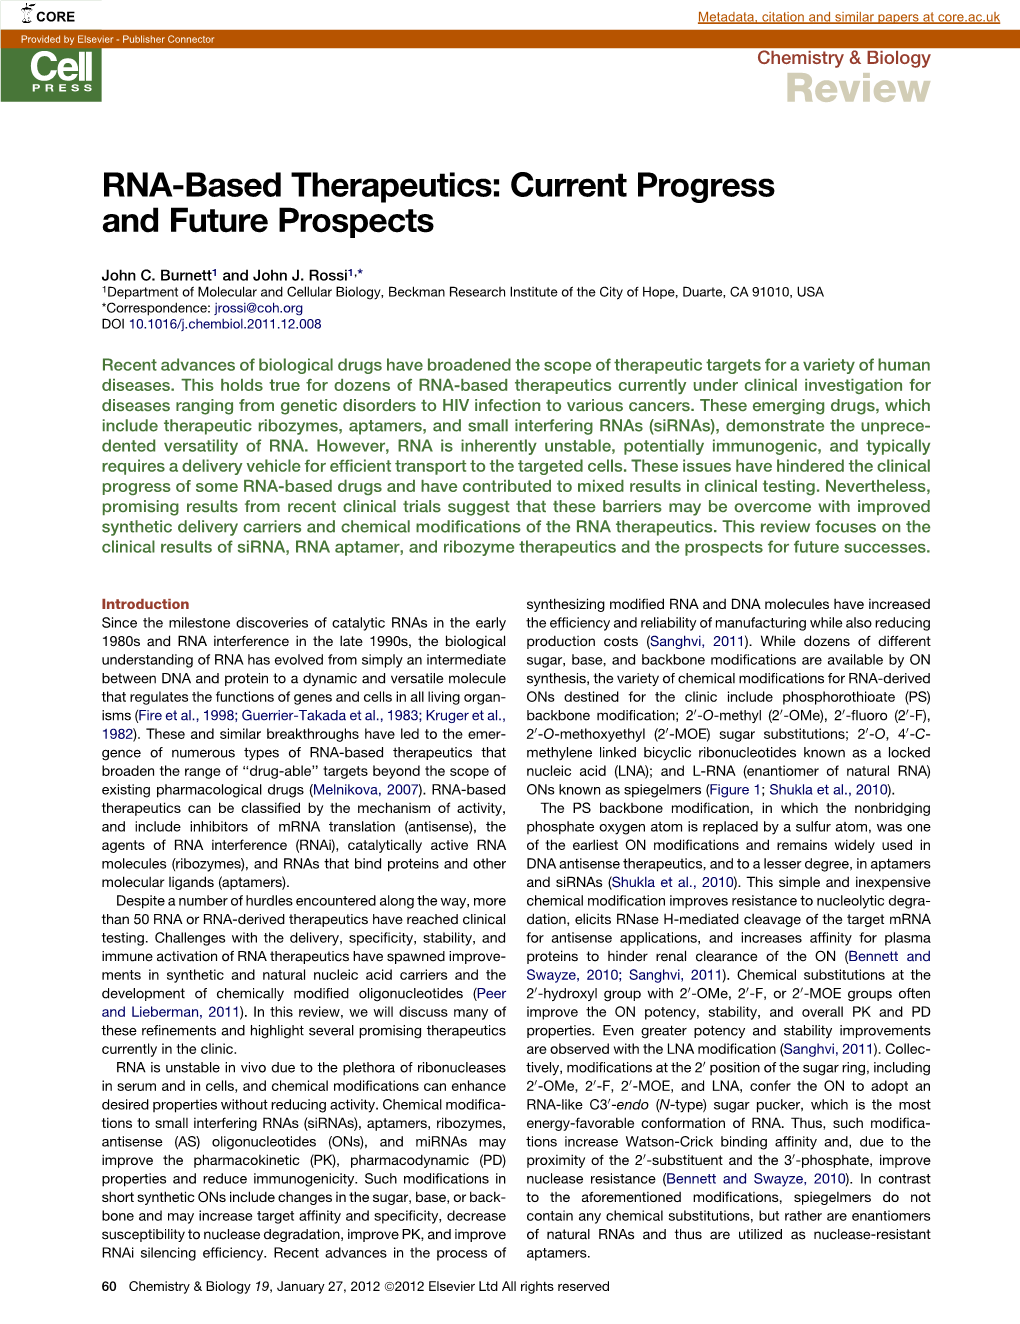 RNA-Based Therapeutics: Current Progress and Future Prospects